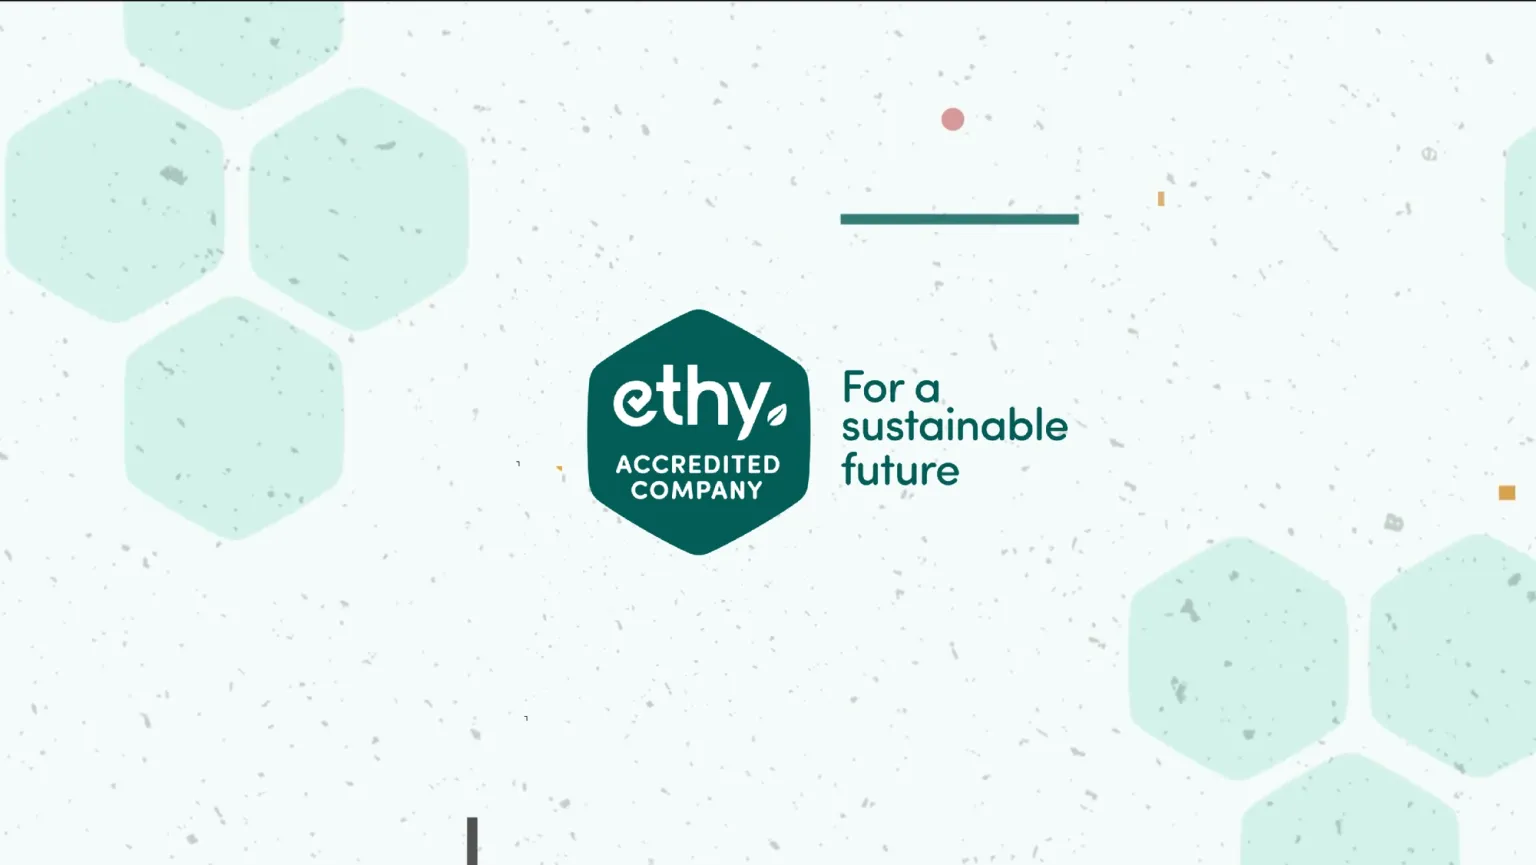 As an ethy accredited company, you can demonstrate your commitment for a more sustainable future using this specific accreditation mark.  Only companies that have successfully passed ethy's accreditation assessment are permitted to use the accreditation mark.